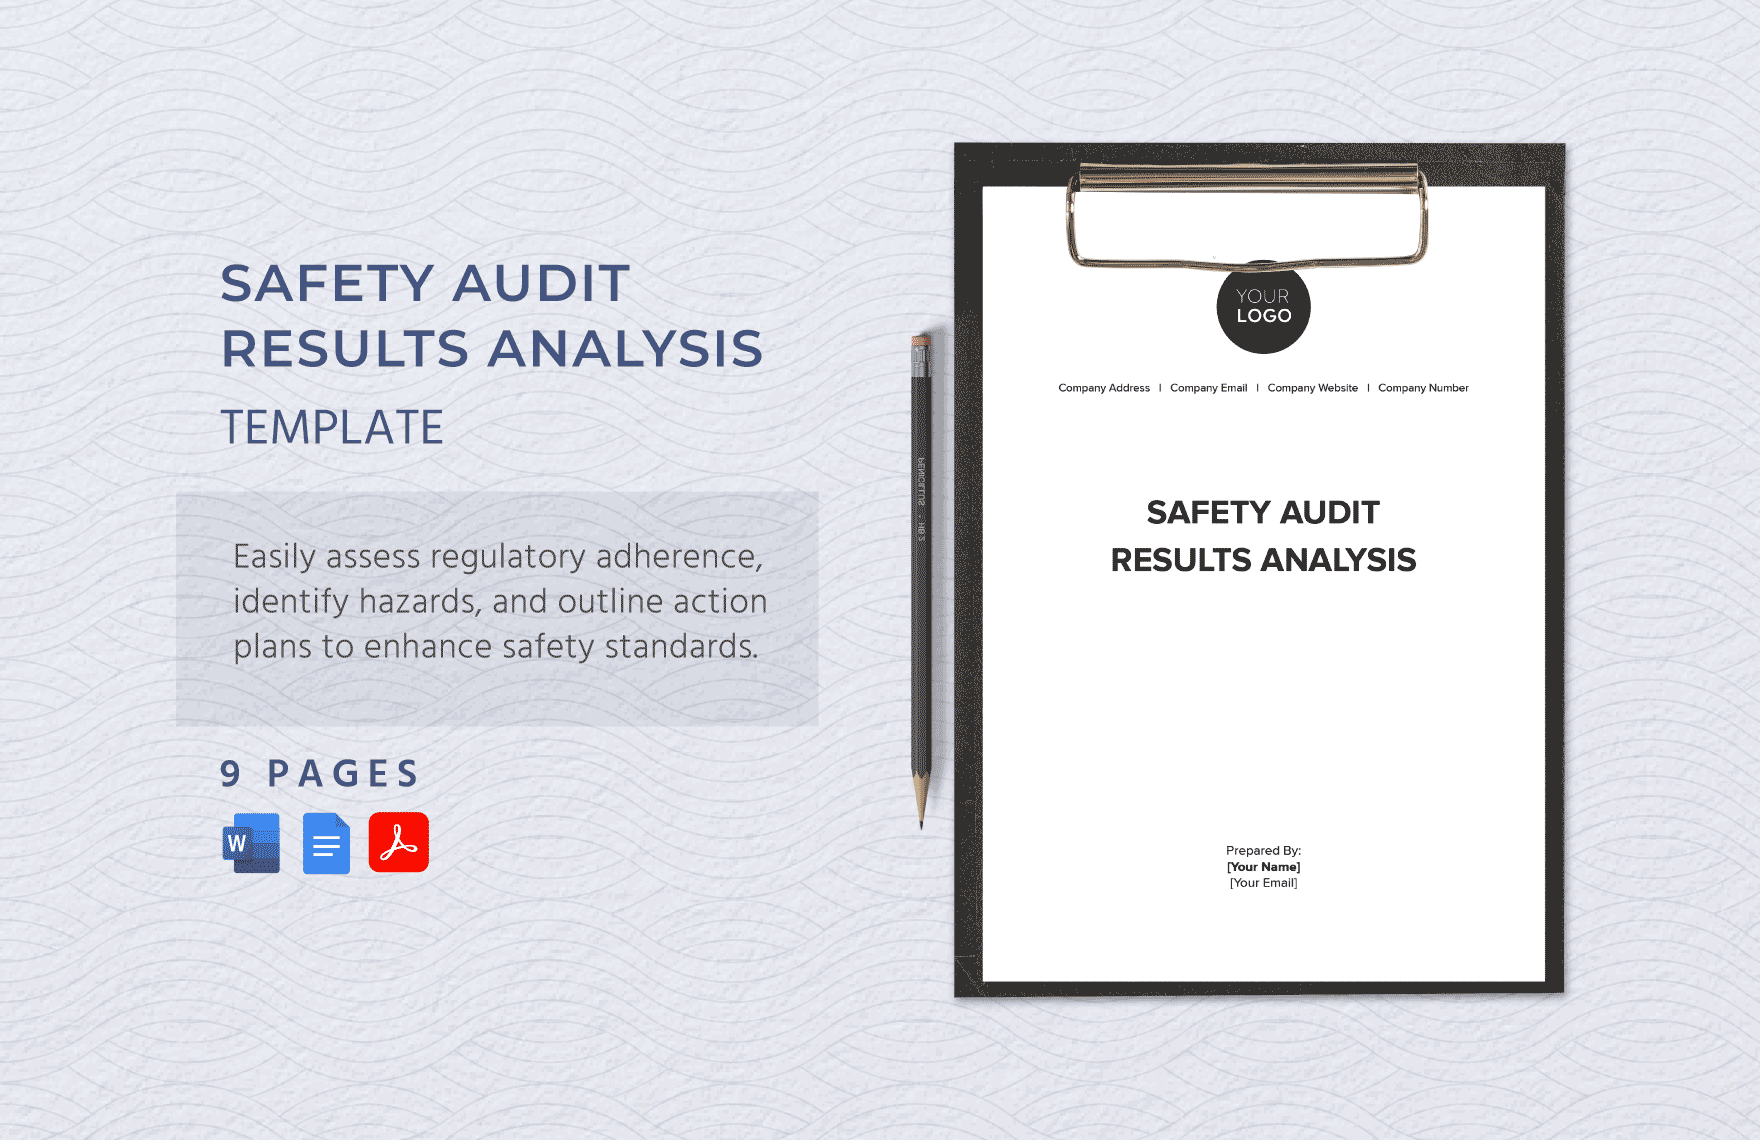 Safety Audit Results Analysis Template